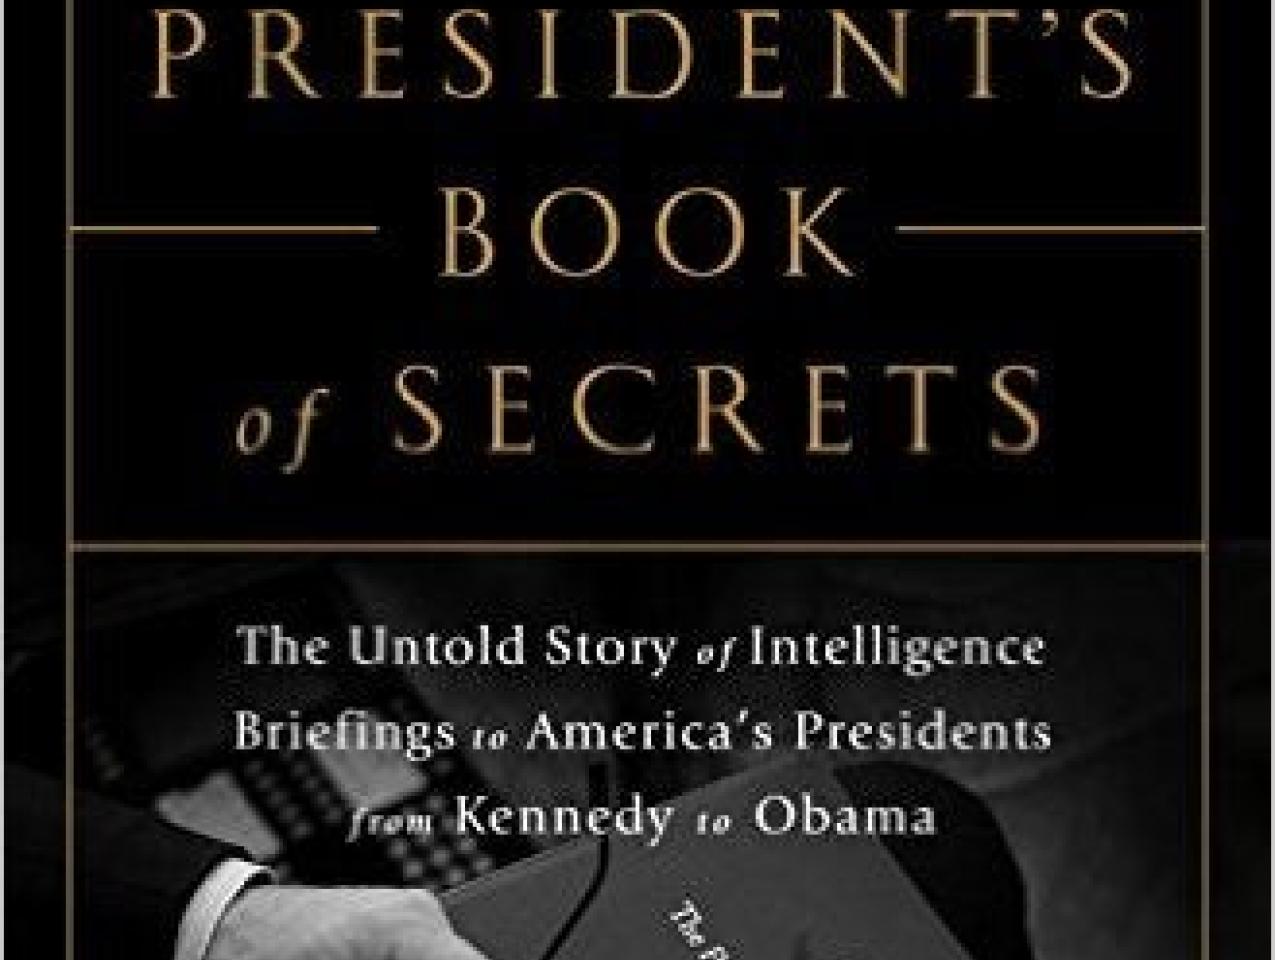 Image for The President's Book Of Secrets: The Untold Story Of Intelligence Briefings To America's Presidents From Kennedy To Obama 